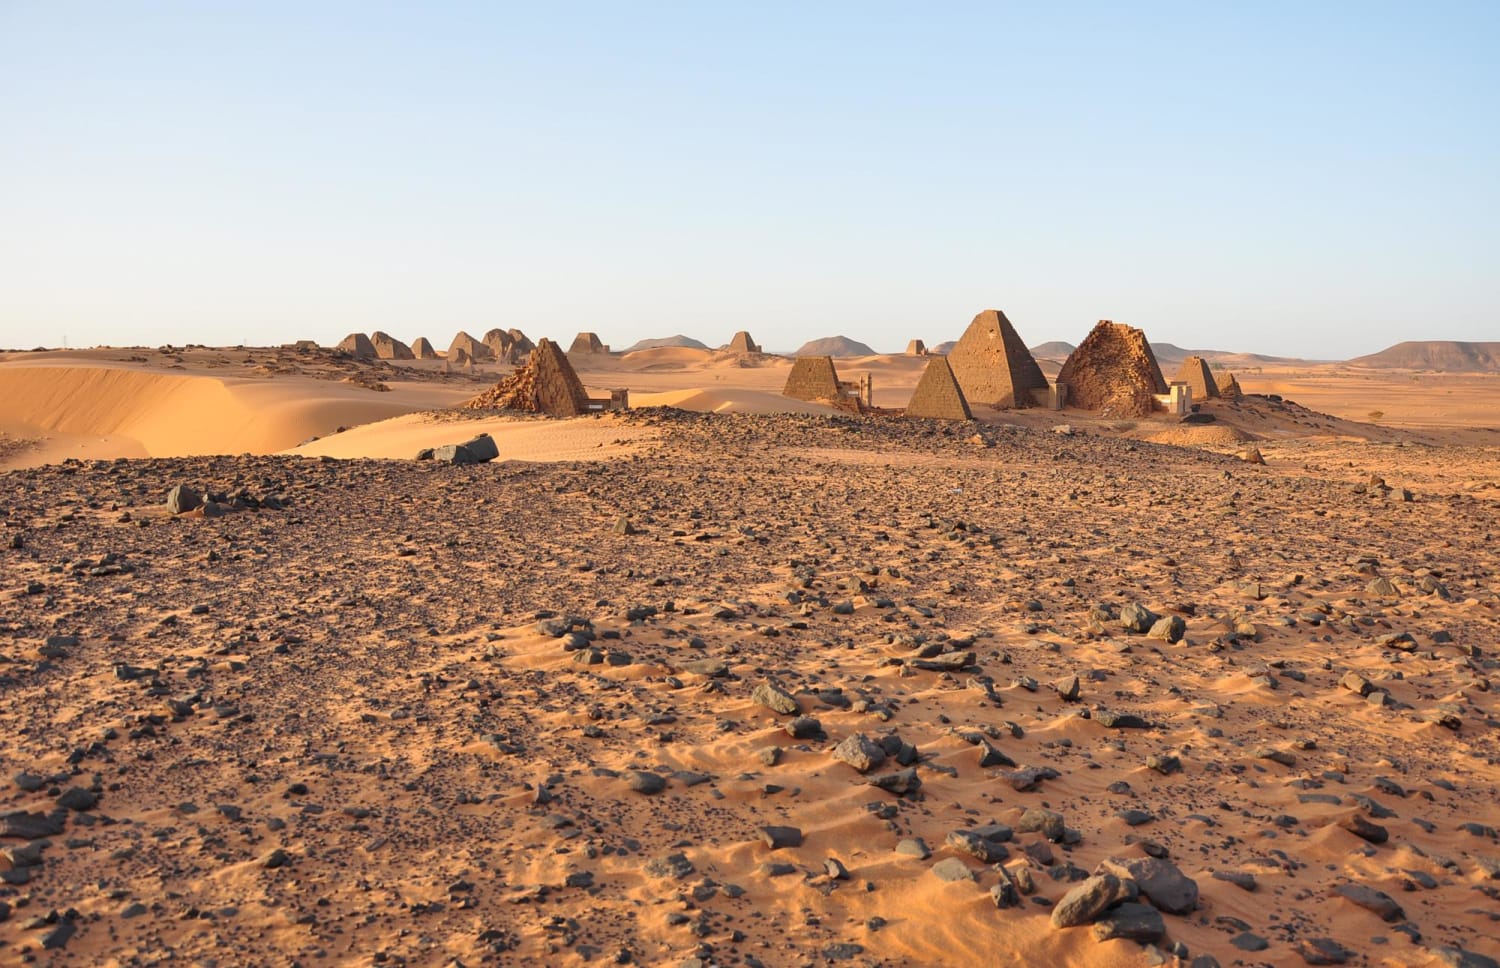 The Forgotten Pyramids of Meroë - 16 photos of a fascinating archaeological site in Sudan: http://t.co/B2jBUG1VoE http://t.co/fuiuMkZpZX